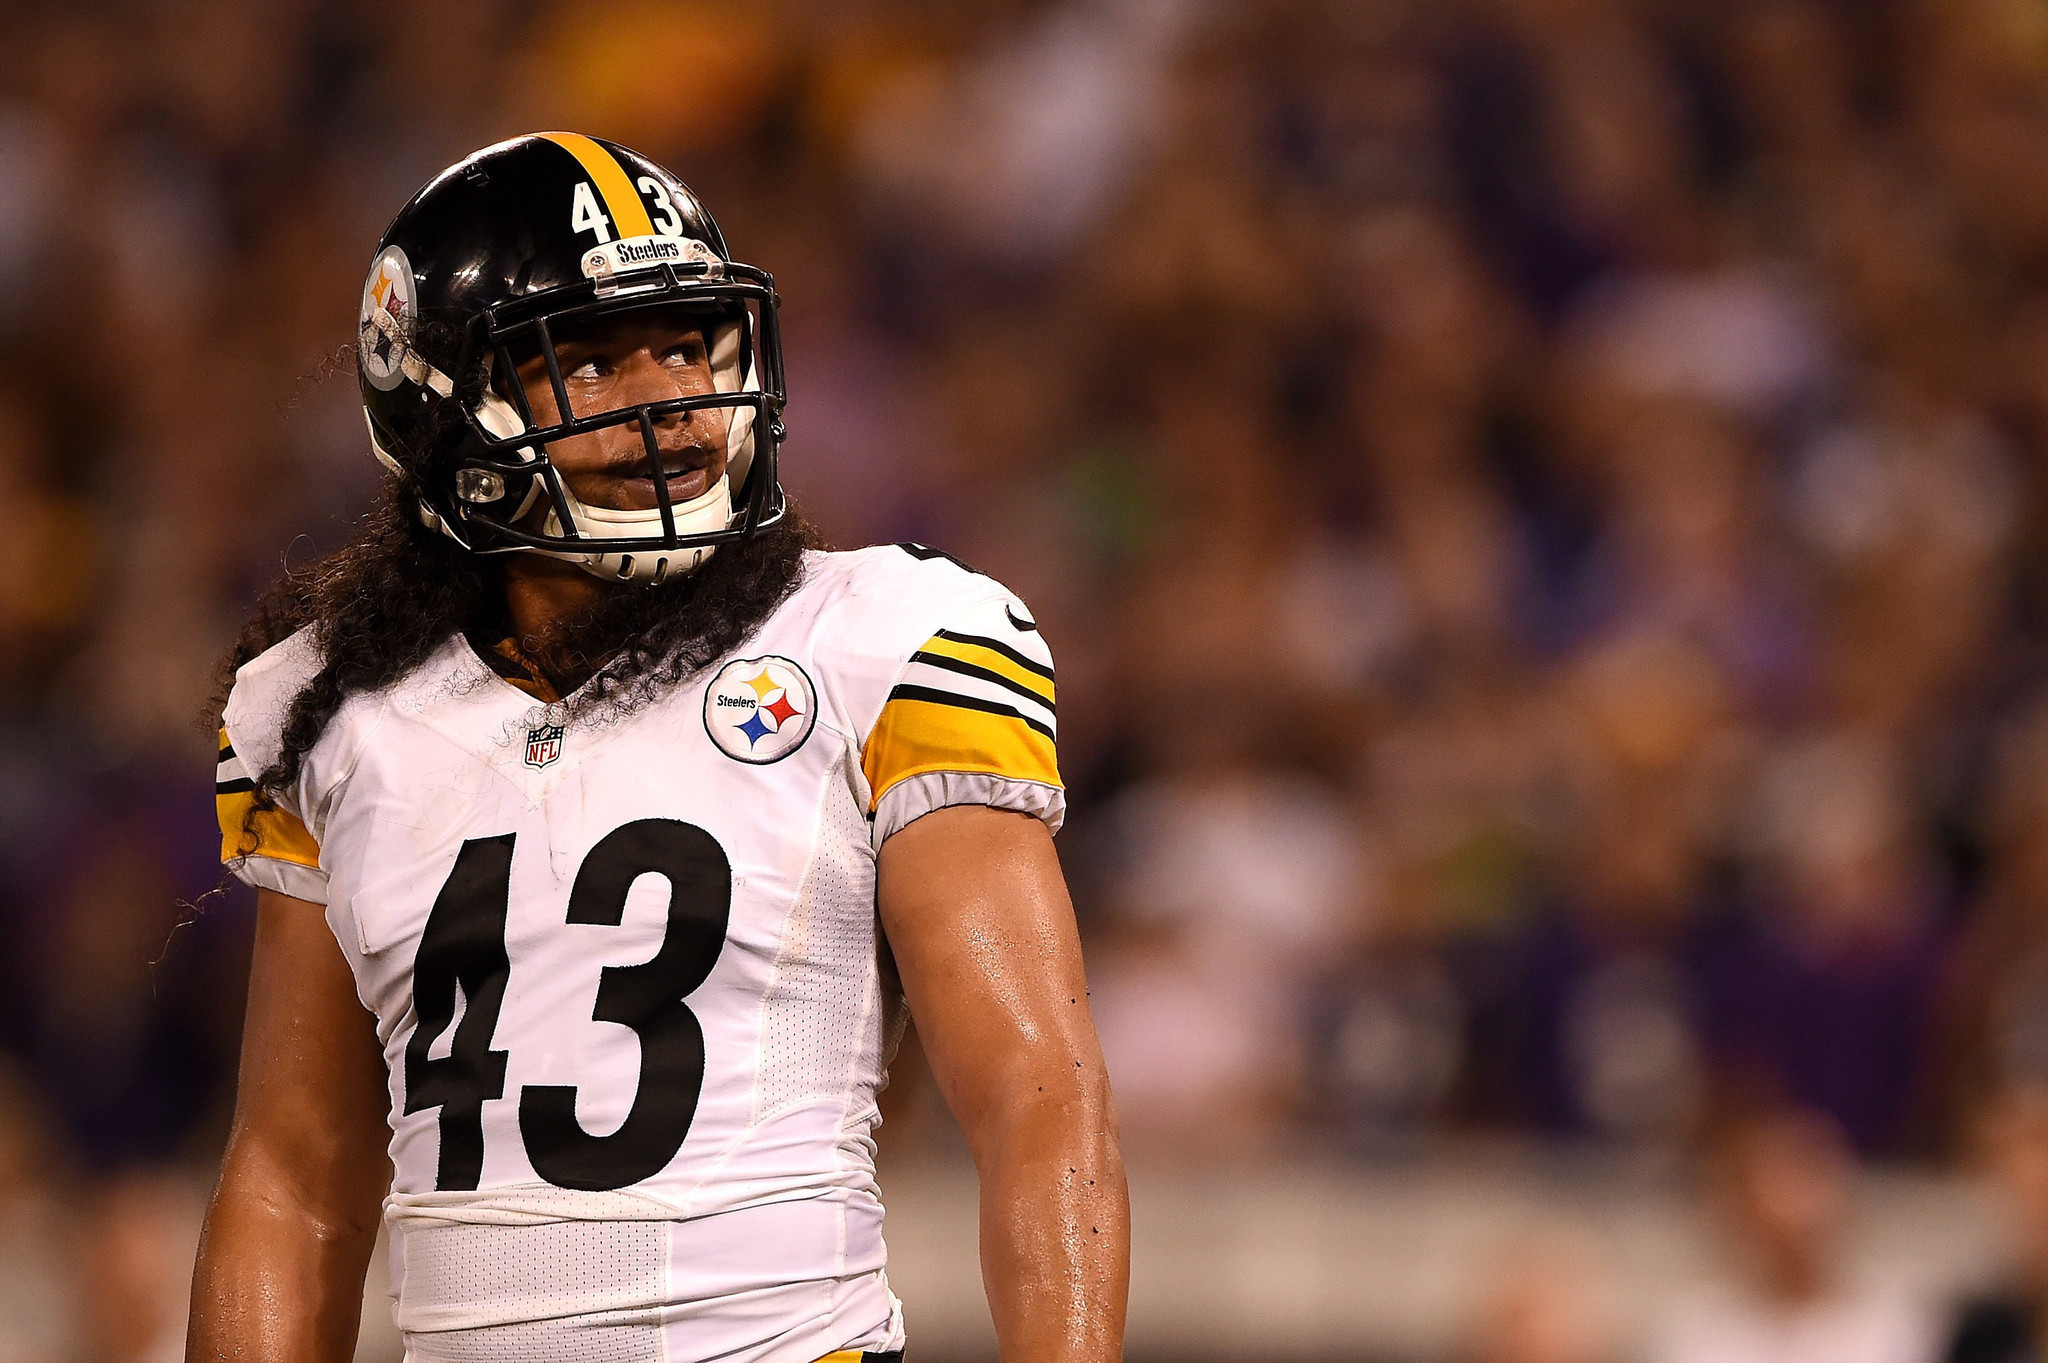 Current and former USC players react to Troy Polamalu's retirement